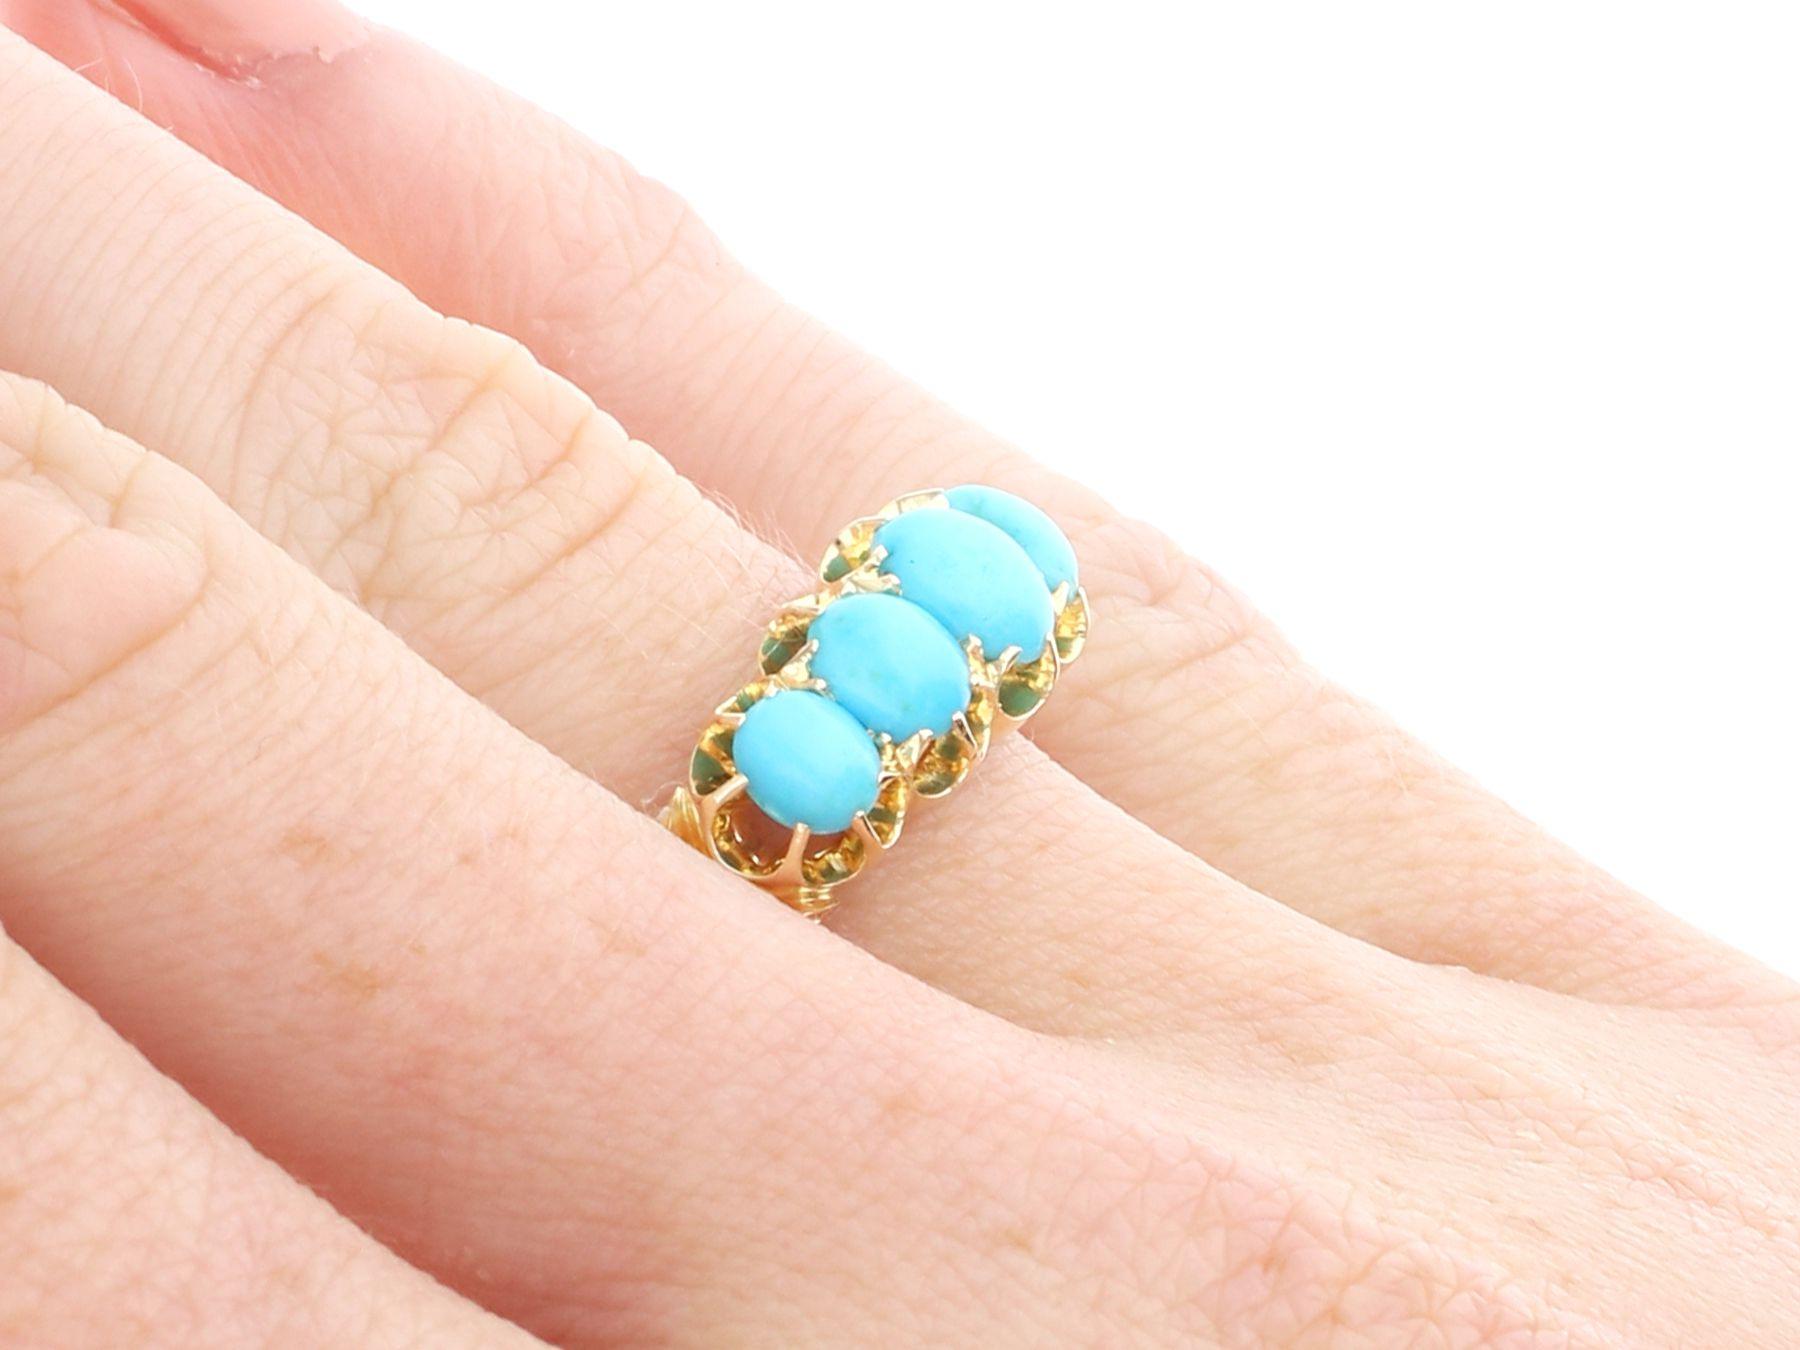 Antique Five Stone 1.95 Carat Turquoise Ring For Sale 2